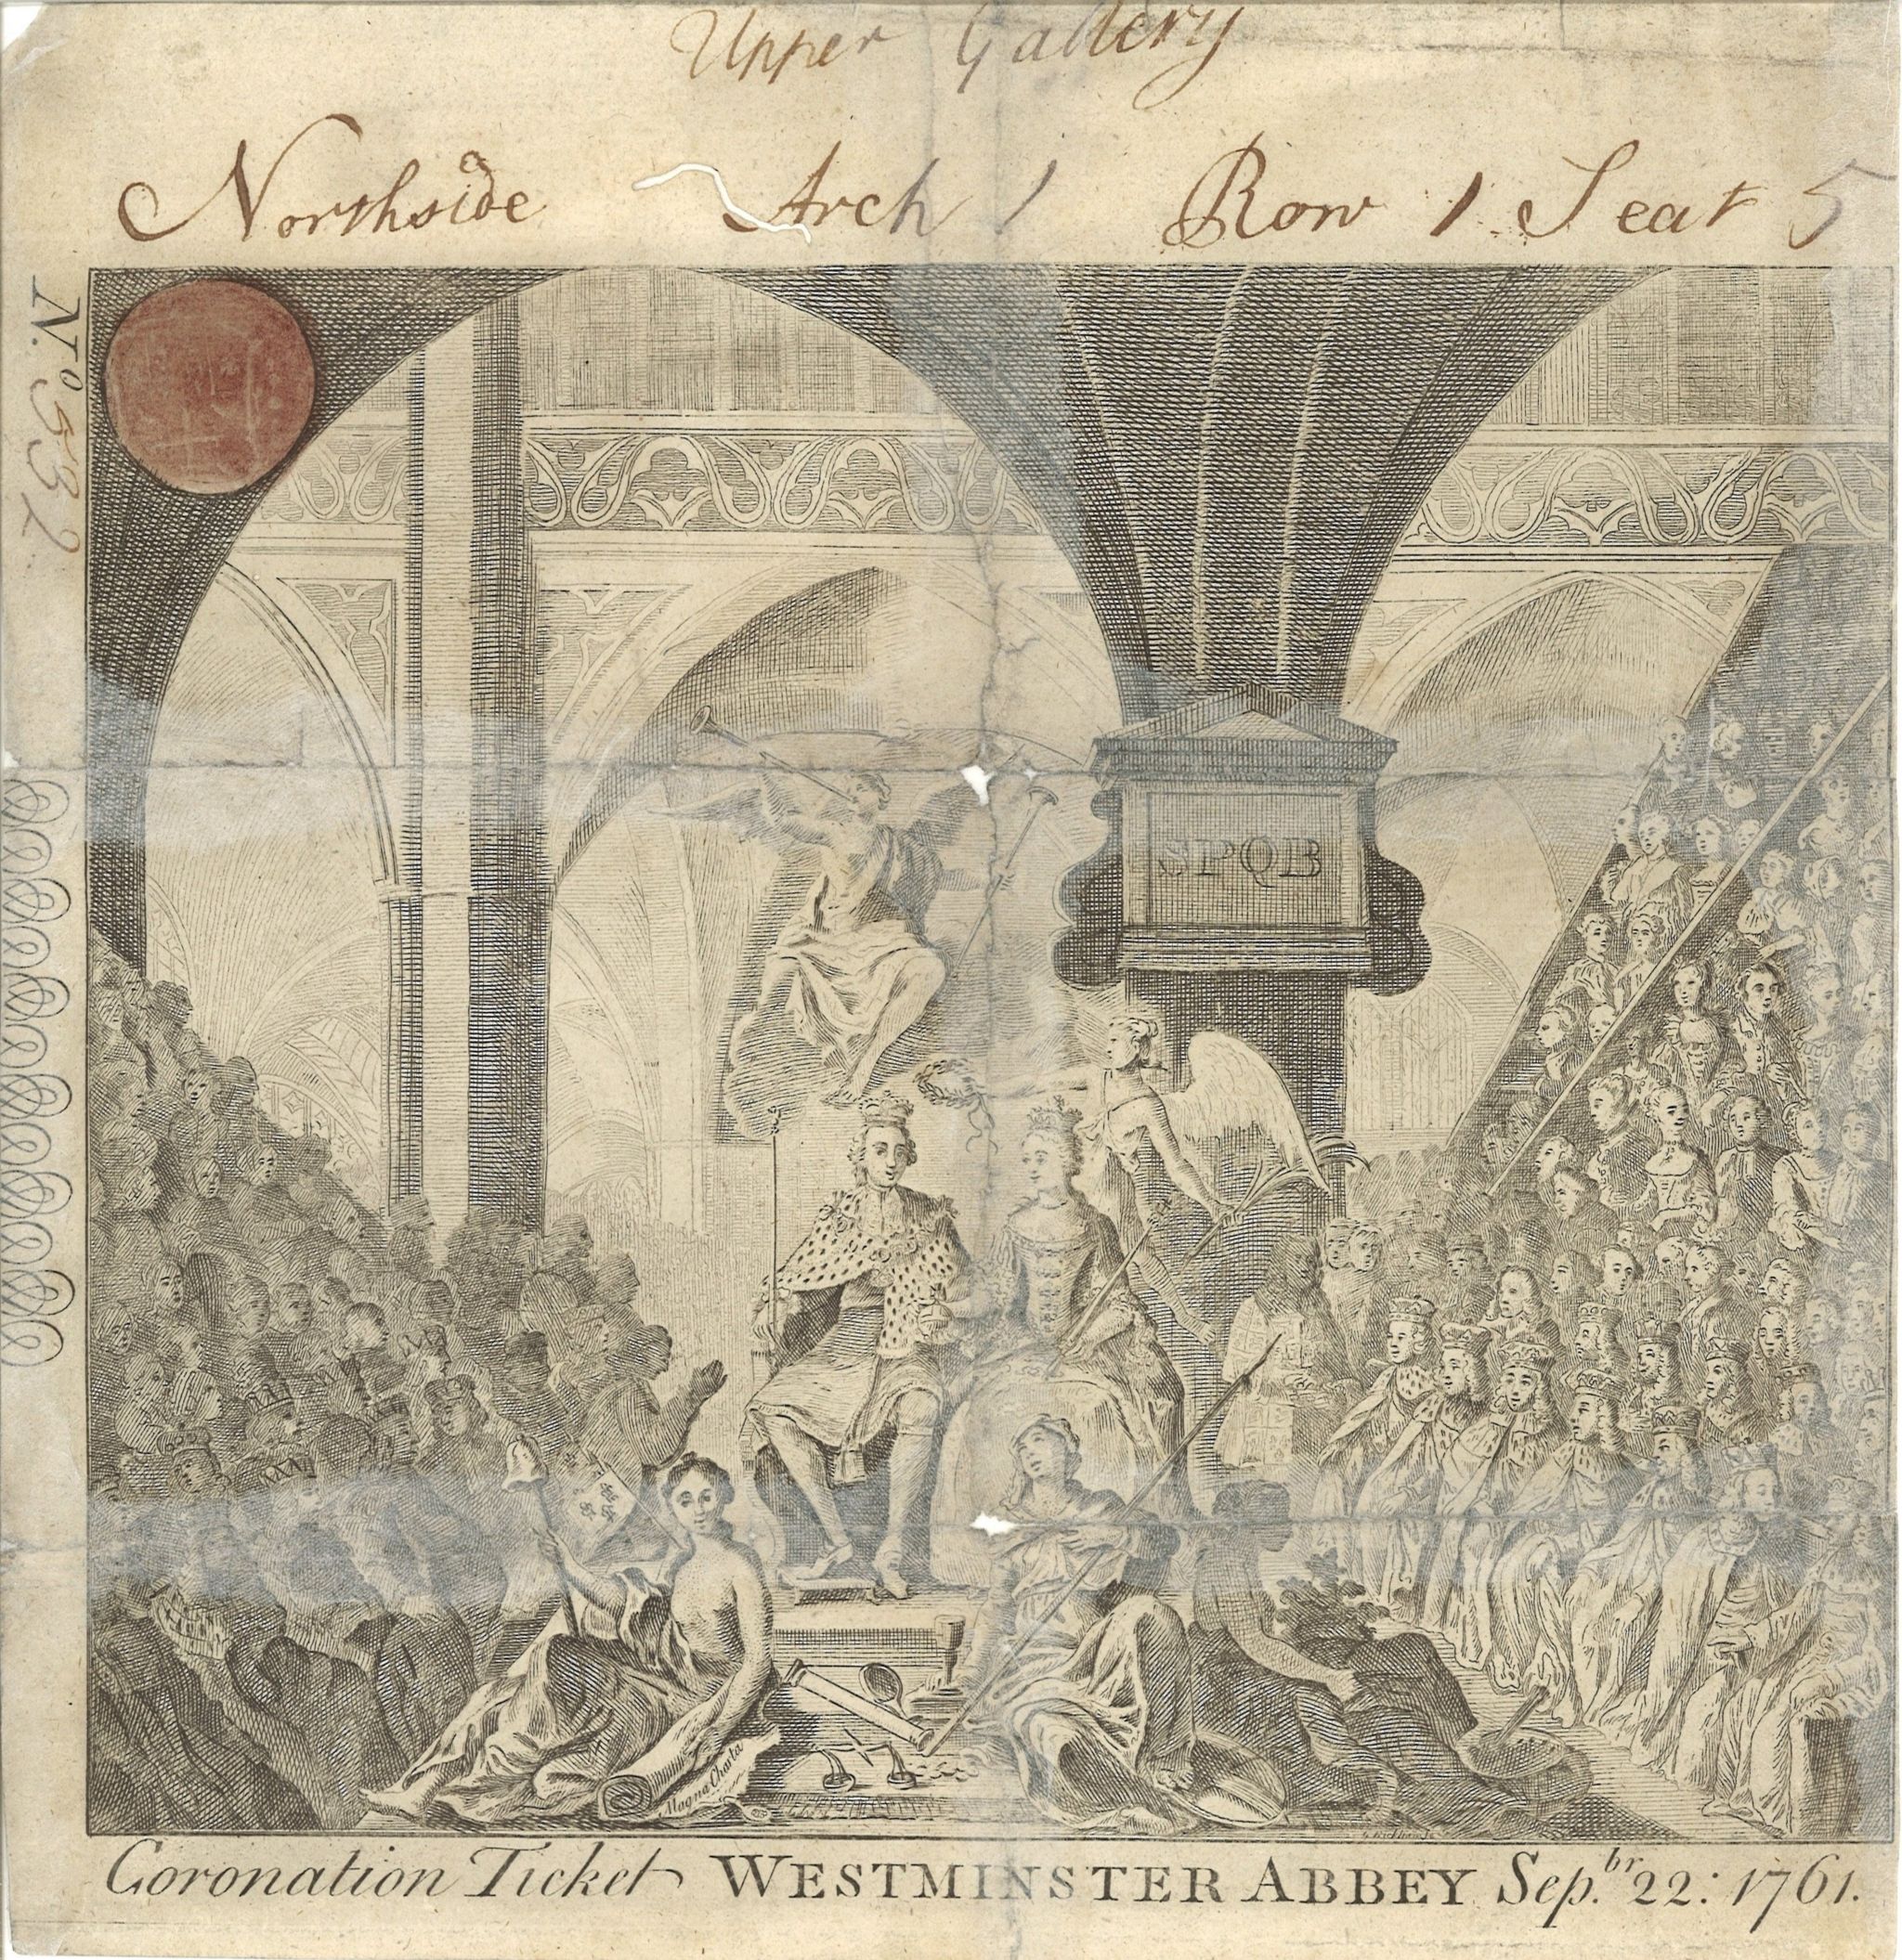 An invitation to King George III and Queen Charlotte's coronation